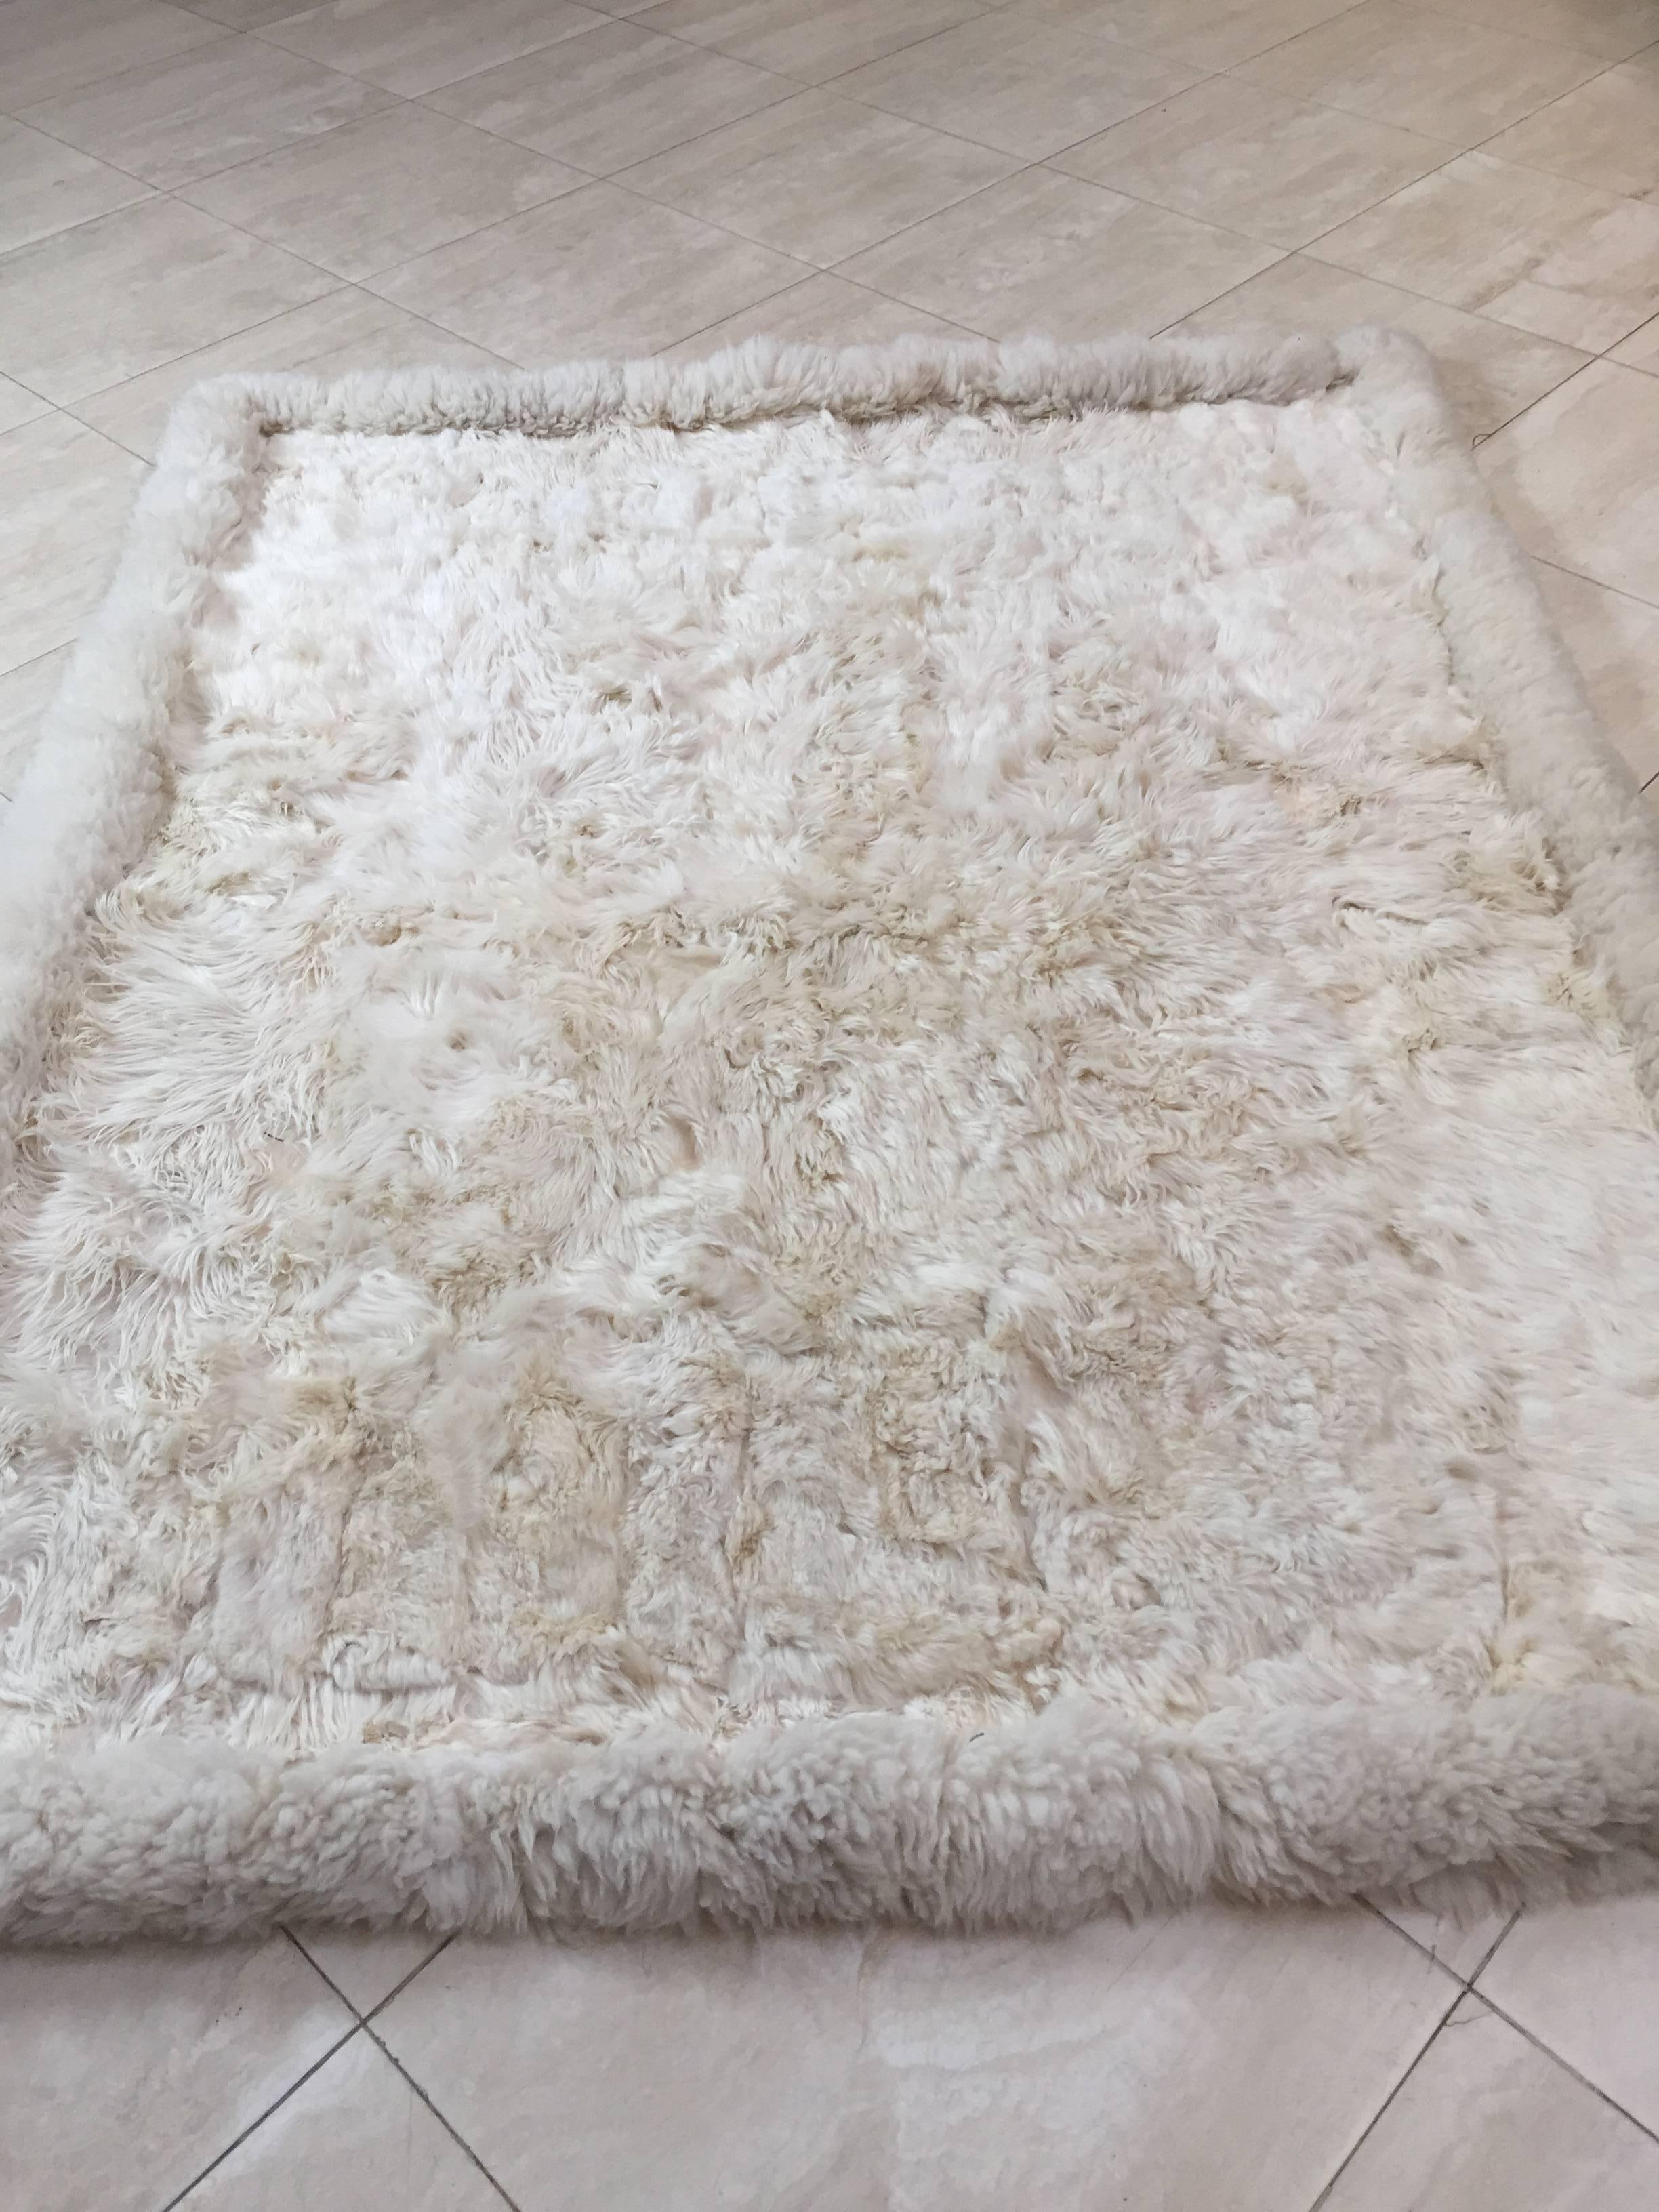 Shaggy white wild sheep skin bed throw or rug.
Quilted from pieces of fluffy soft sheep skin and sewn together.
New Zealand.
Natural ivory white sheep color.